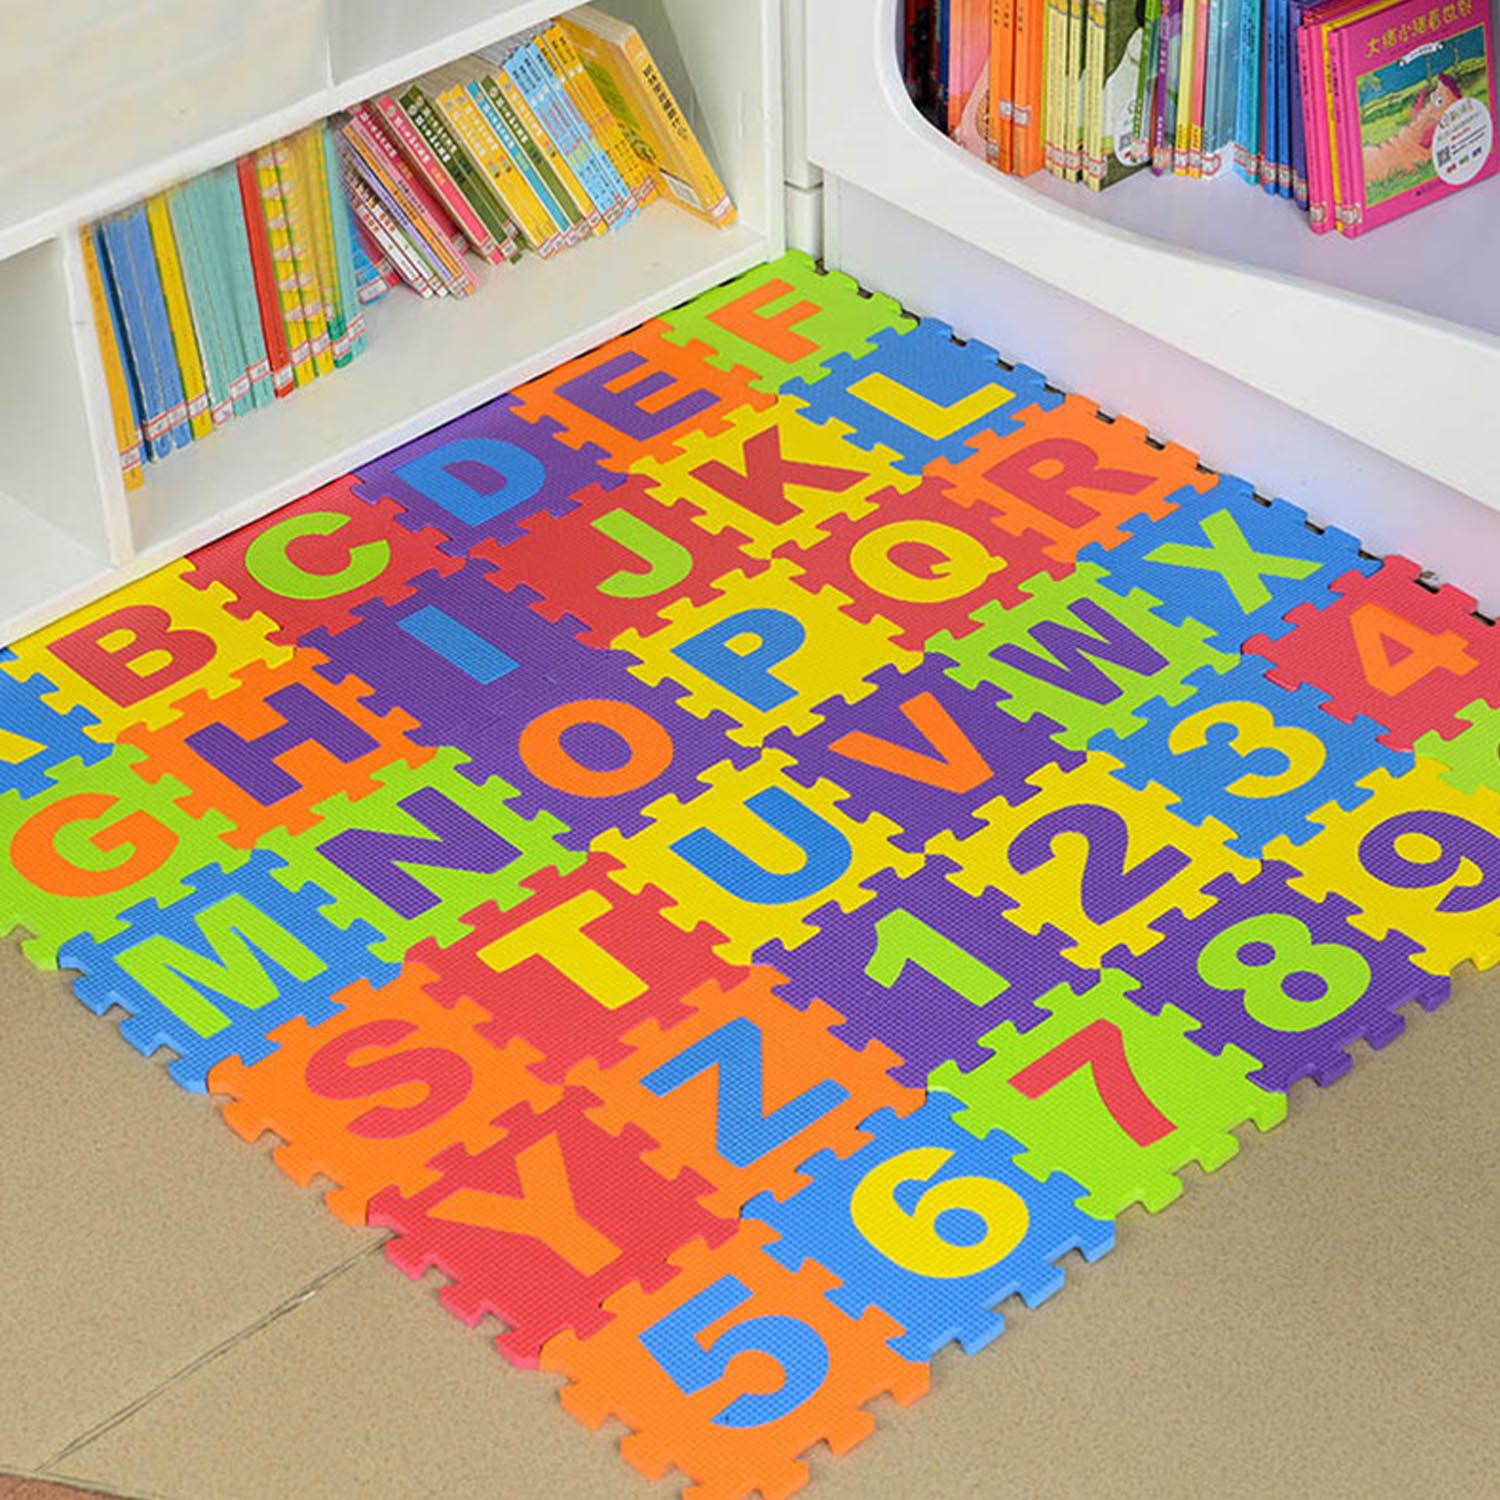 36Pcs Russian Letters Numbers Small Floor Soft EVA Foam Baby Play Mat Tiles ~2" 